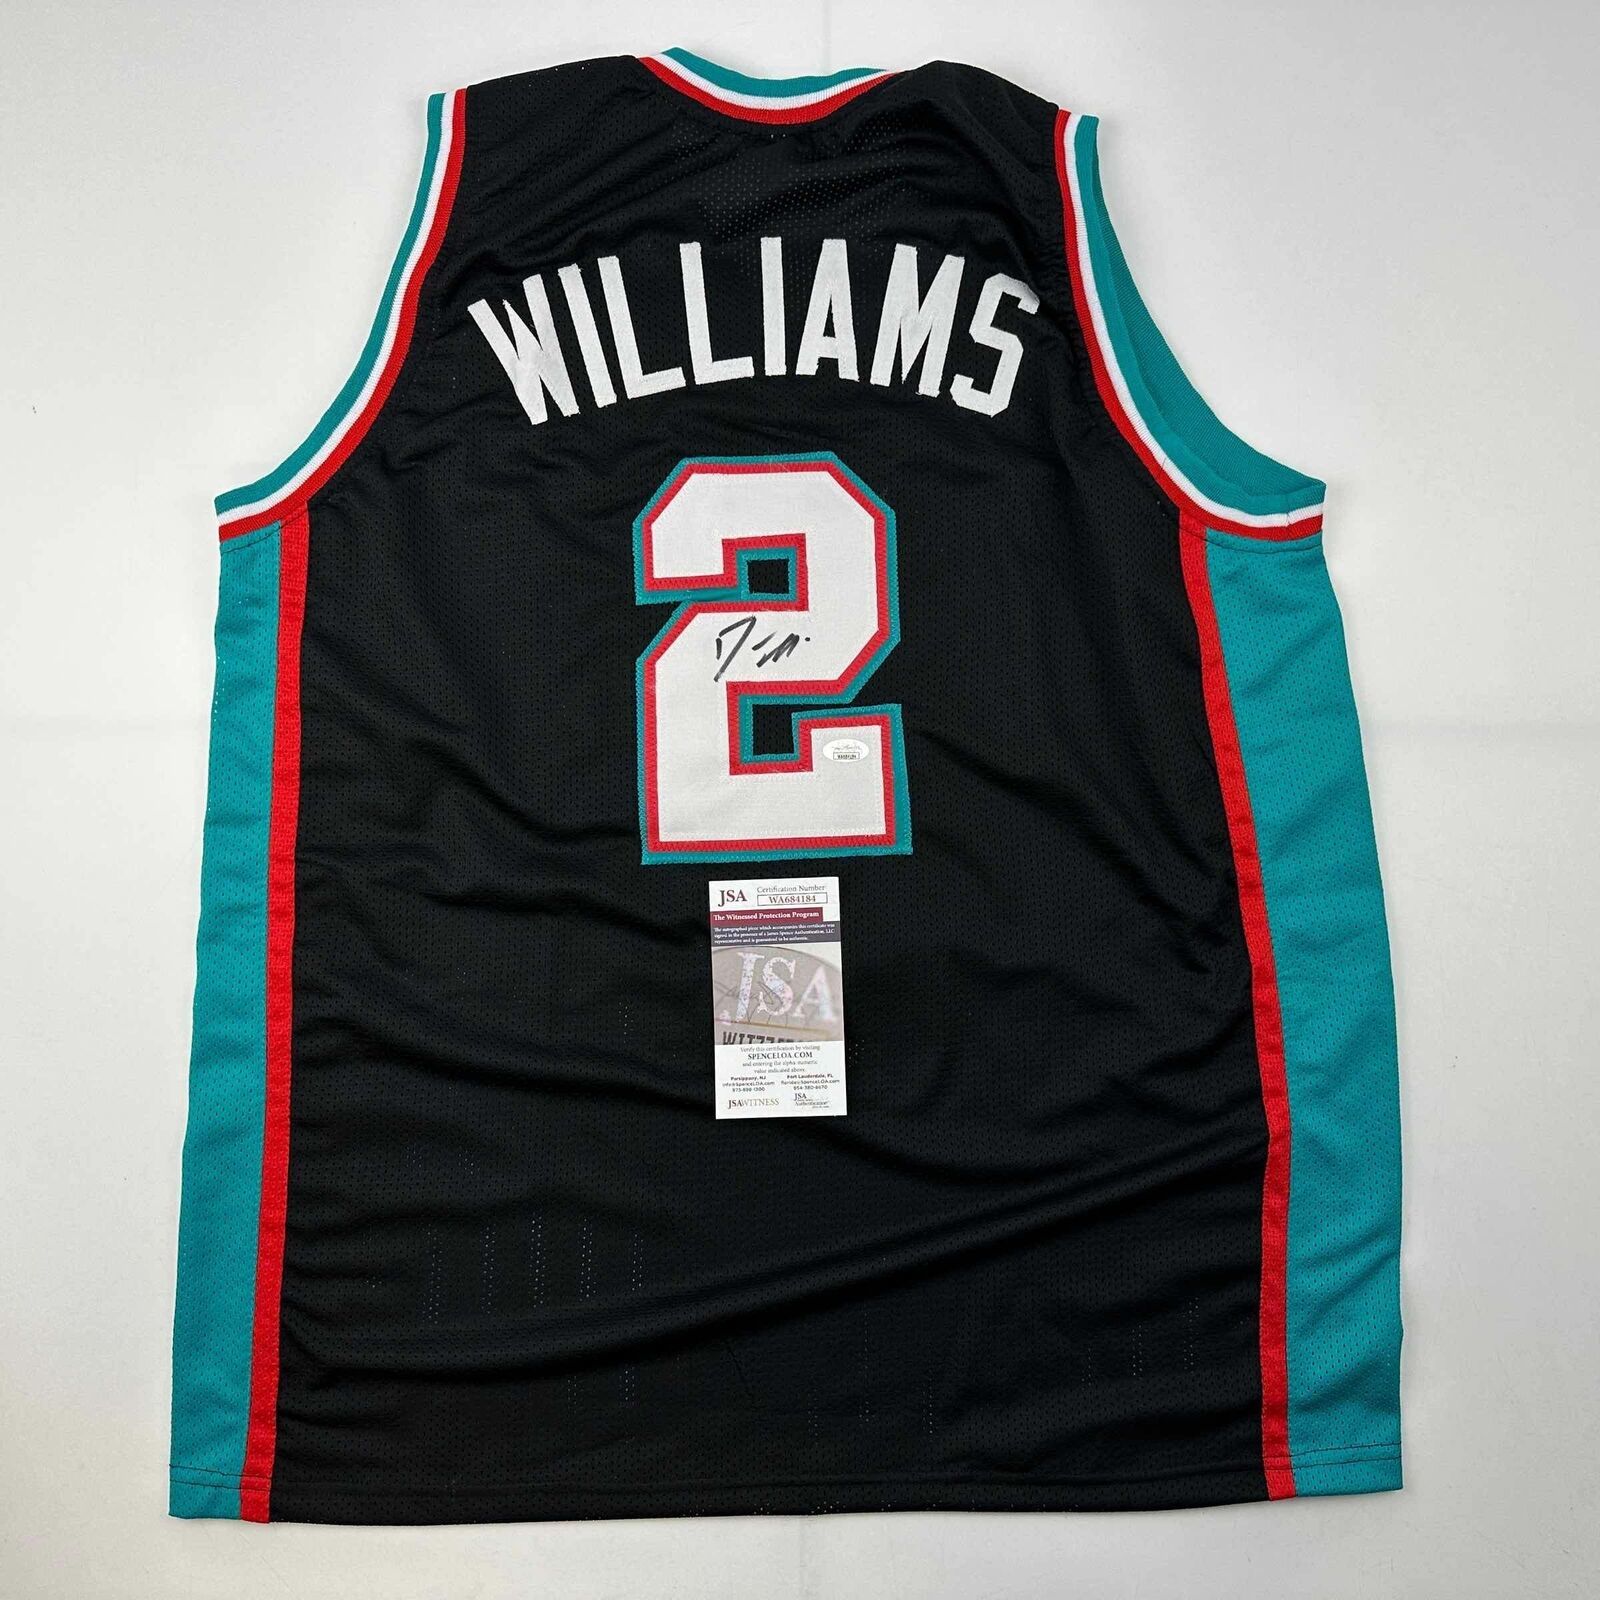 Framed Autographed/Signed Dennis Rodman 33x42 Chicago Red Basketball Jersey  JSA COA at 's Sports Collectibles Store